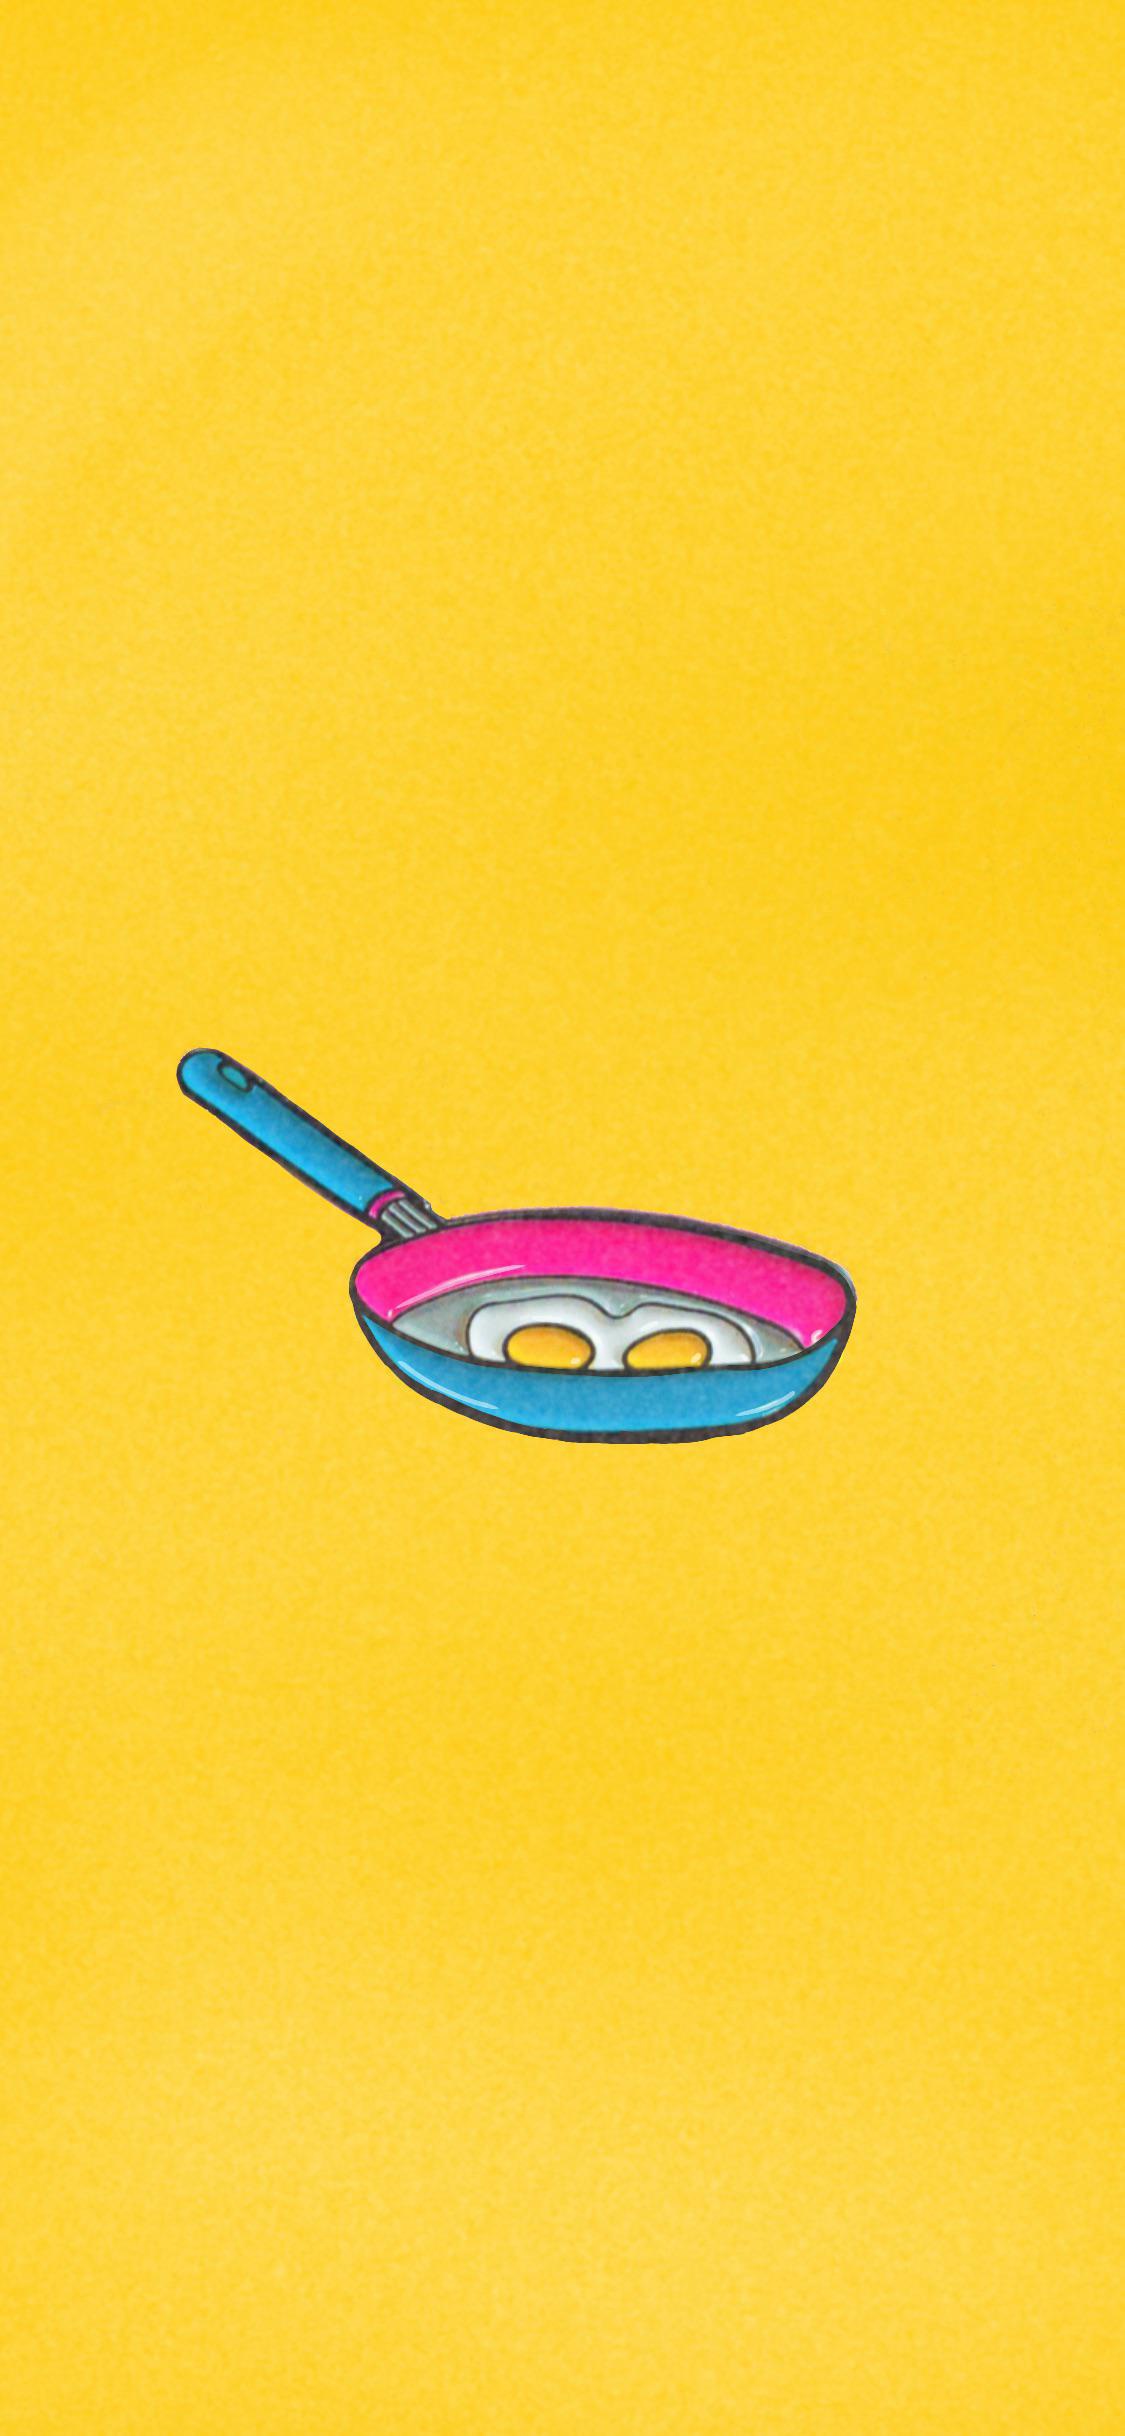 Can anyone give me any subtle pansexual wallpaper for iPhone?